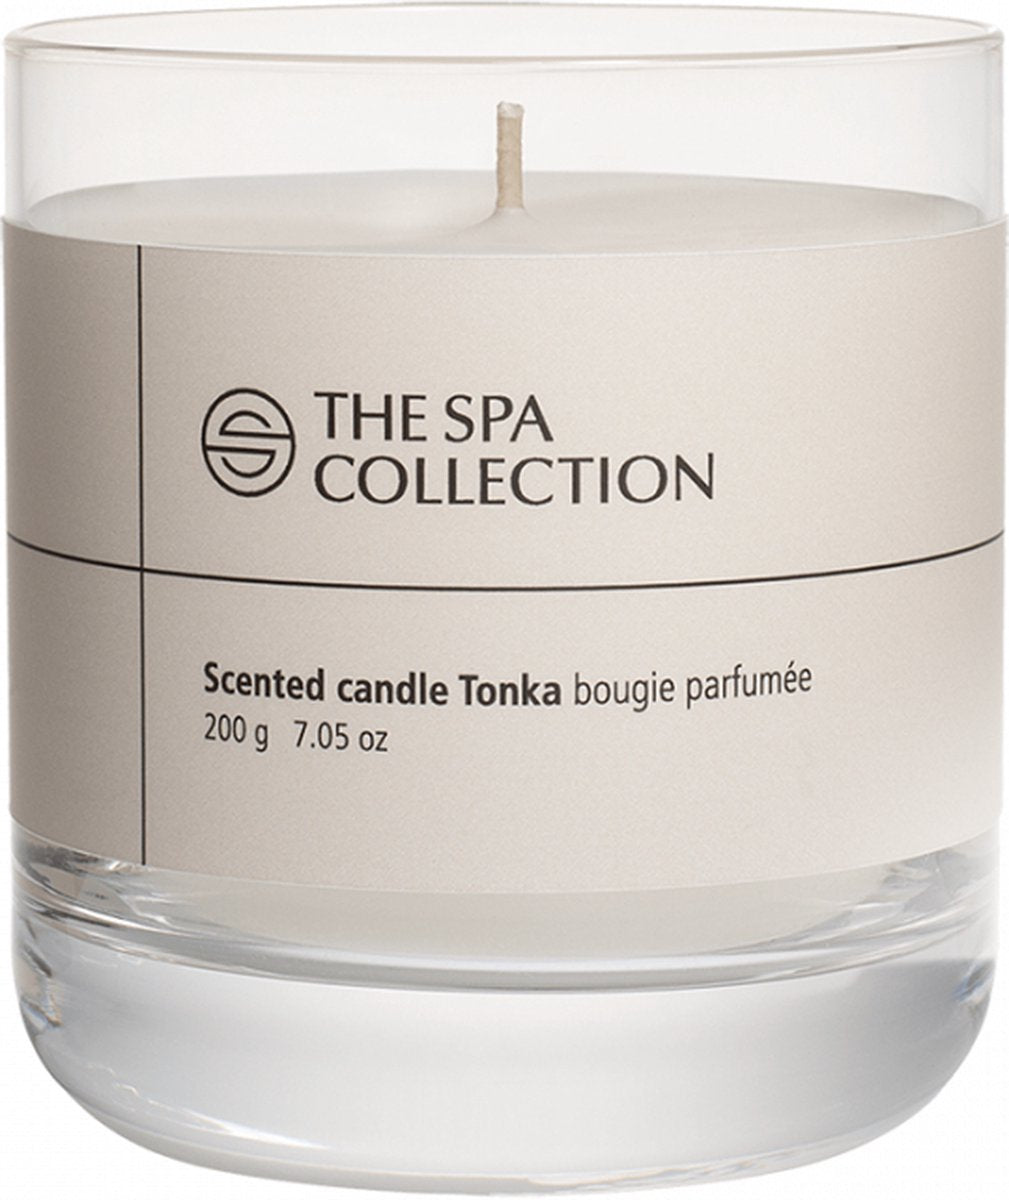 Scented tonka candle in glass - 200 gram - The Spa Collection